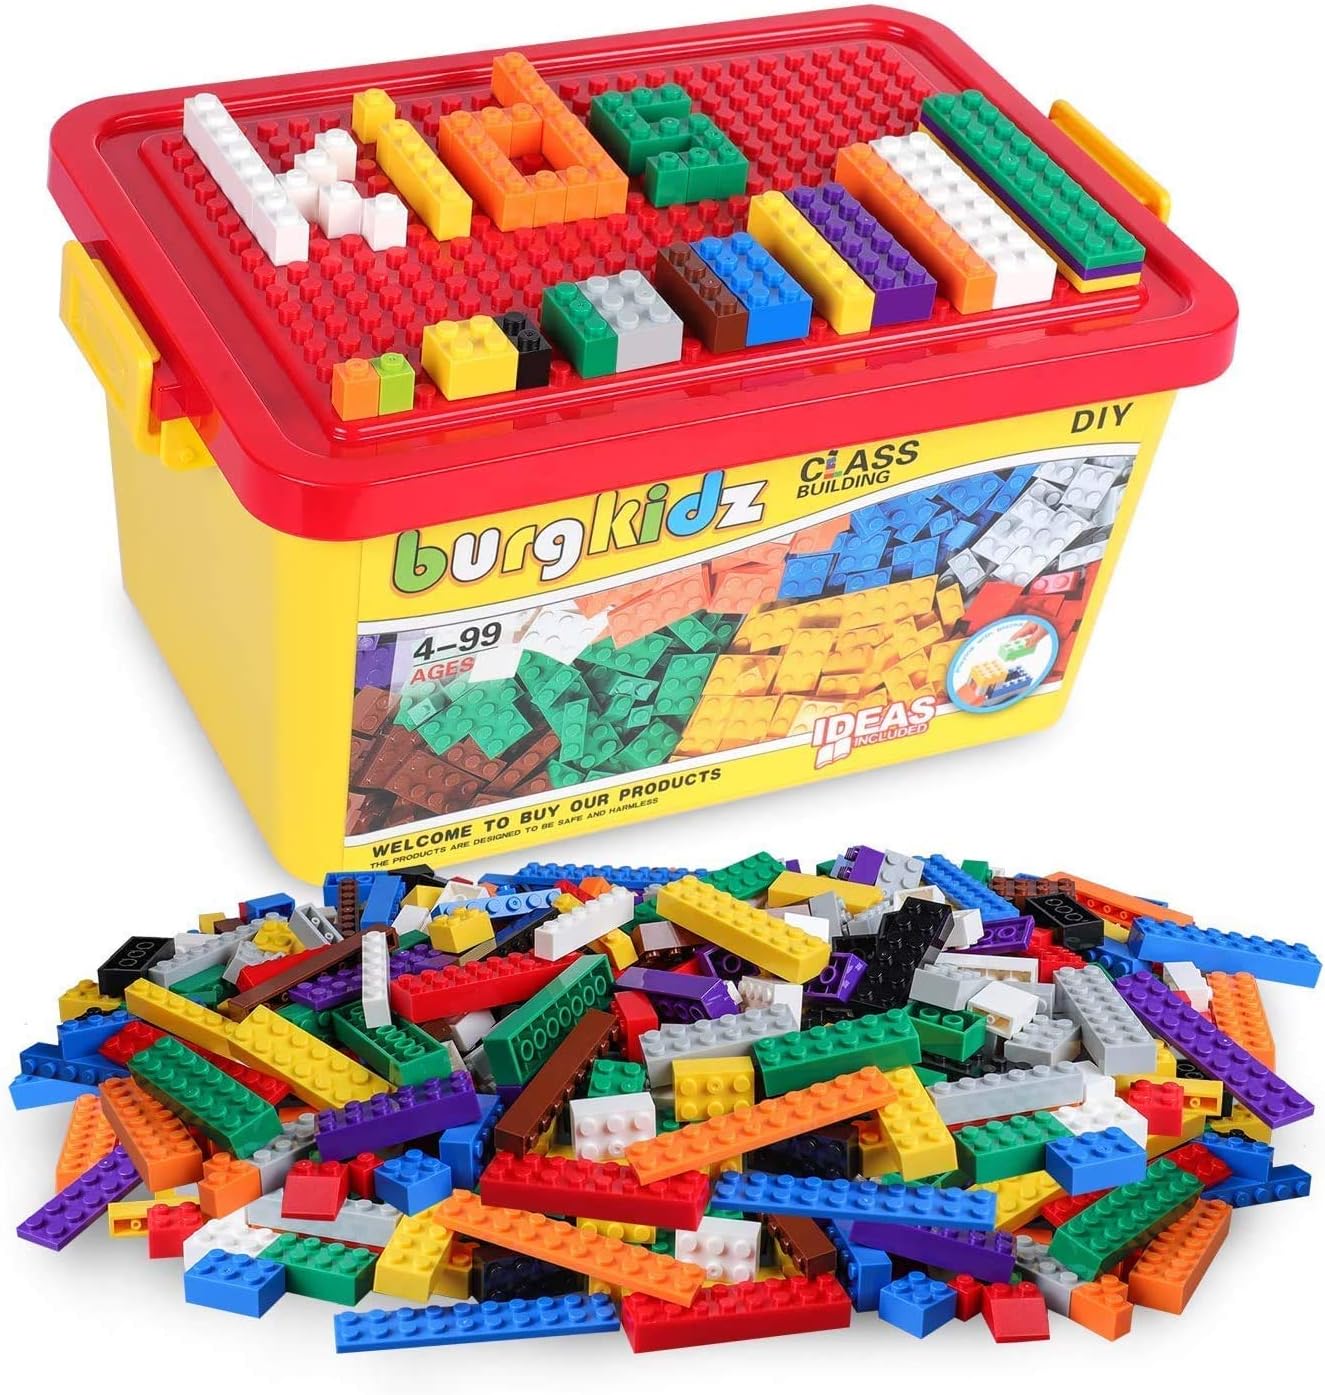 burgkidz Building Bricks 568 Pieces Toys, Classic Building Blocks Includes Wheels, Door, Window, Compatible Bulk Block with Storage Box and Baseplate, STEM Educational Gift for Kids 3+ Year